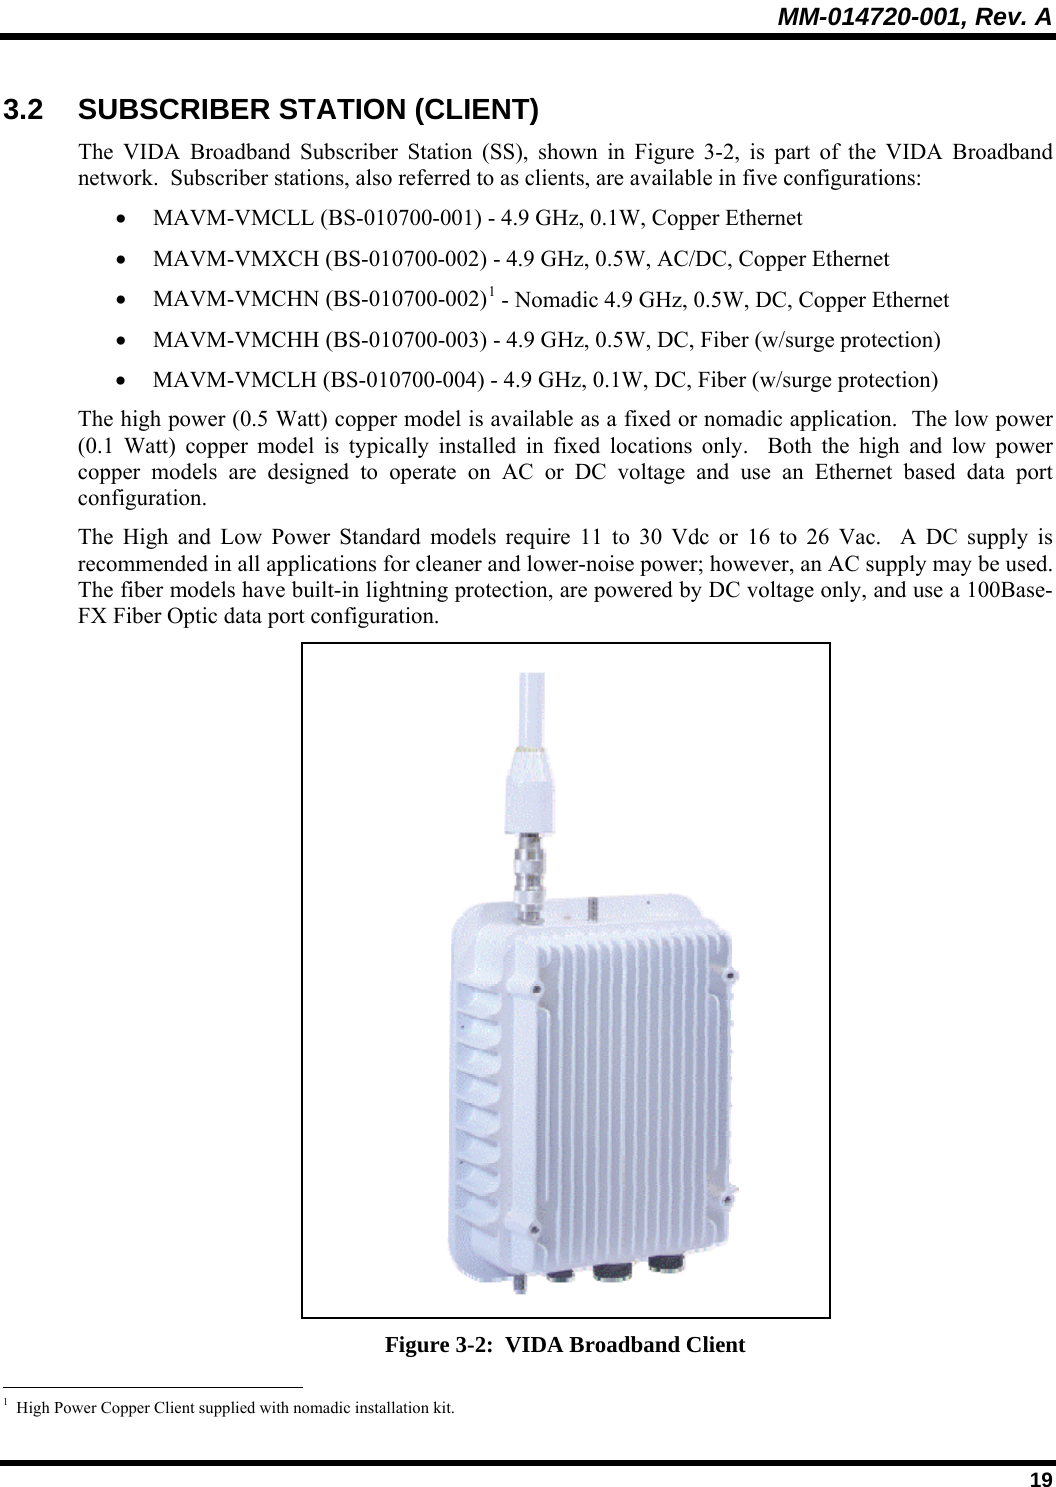 MM-014720-001, Rev. A  19 3.2 SUBSCRIBER STATION (CLIENT) The VIDA Broadband Subscriber Station (SS), shown in Figure 3-2, is part of the VIDA Broadband network.  Subscriber stations, also referred to as clients, are available in five configurations:  • MAVM-VMCLL (BS-010700-001) - 4.9 GHz, 0.1W, Copper Ethernet • MAVM-VMXCH (BS-010700-002) - 4.9 GHz, 0.5W, AC/DC, Copper Ethernet • MAVM-VMCHN (BS-010700-002)1 - Nomadic 4.9 GHz, 0.5W, DC, Copper Ethernet • MAVM-VMCHH (BS-010700-003) - 4.9 GHz, 0.5W, DC, Fiber (w/surge protection) • MAVM-VMCLH (BS-010700-004) - 4.9 GHz, 0.1W, DC, Fiber (w/surge protection) The high power (0.5 Watt) copper model is available as a fixed or nomadic application.  The low power (0.1 Watt) copper model is typically installed in fixed locations only.  Both the high and low power copper models are designed to operate on AC or DC voltage and use an Ethernet based data port configuration.   The High and Low Power Standard models require 11 to 30 Vdc or 16 to 26 Vac.  A DC supply is recommended in all applications for cleaner and lower-noise power; however, an AC supply may be used.  The fiber models have built-in lightning protection, are powered by DC voltage only, and use a 100Base-FX Fiber Optic data port configuration.  Figure 3-2:  VIDA Broadband Client                                                       1  High Power Copper Client supplied with nomadic installation kit. 